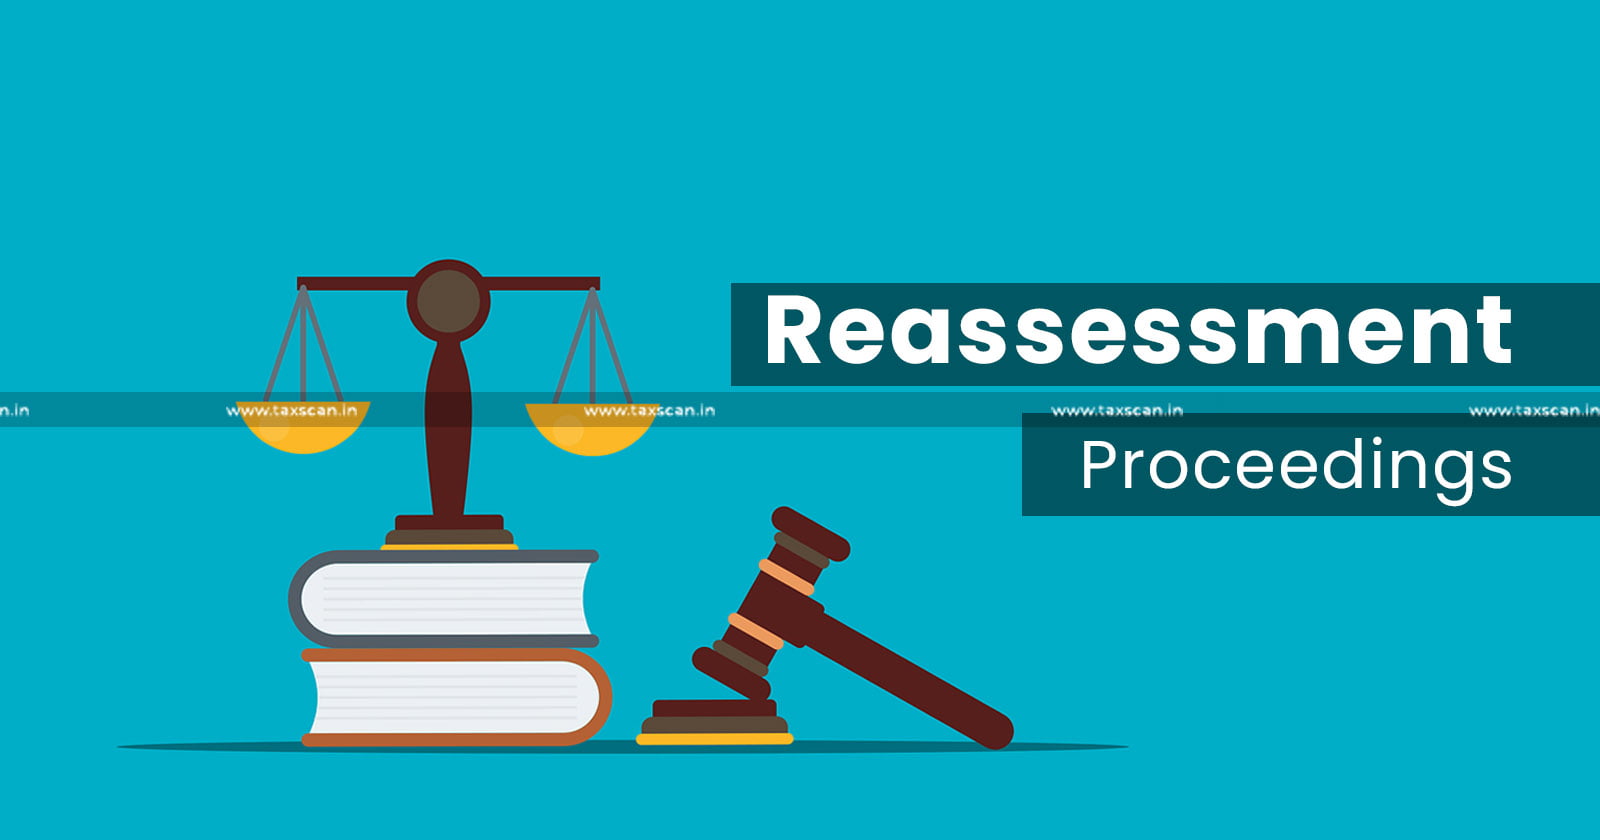 Order - Reassessment Proceedings - Reassessment Proceedings Initiated before Search and Seizure is Void Ab Initio - Search and Seizure - ITAT - Taxscan